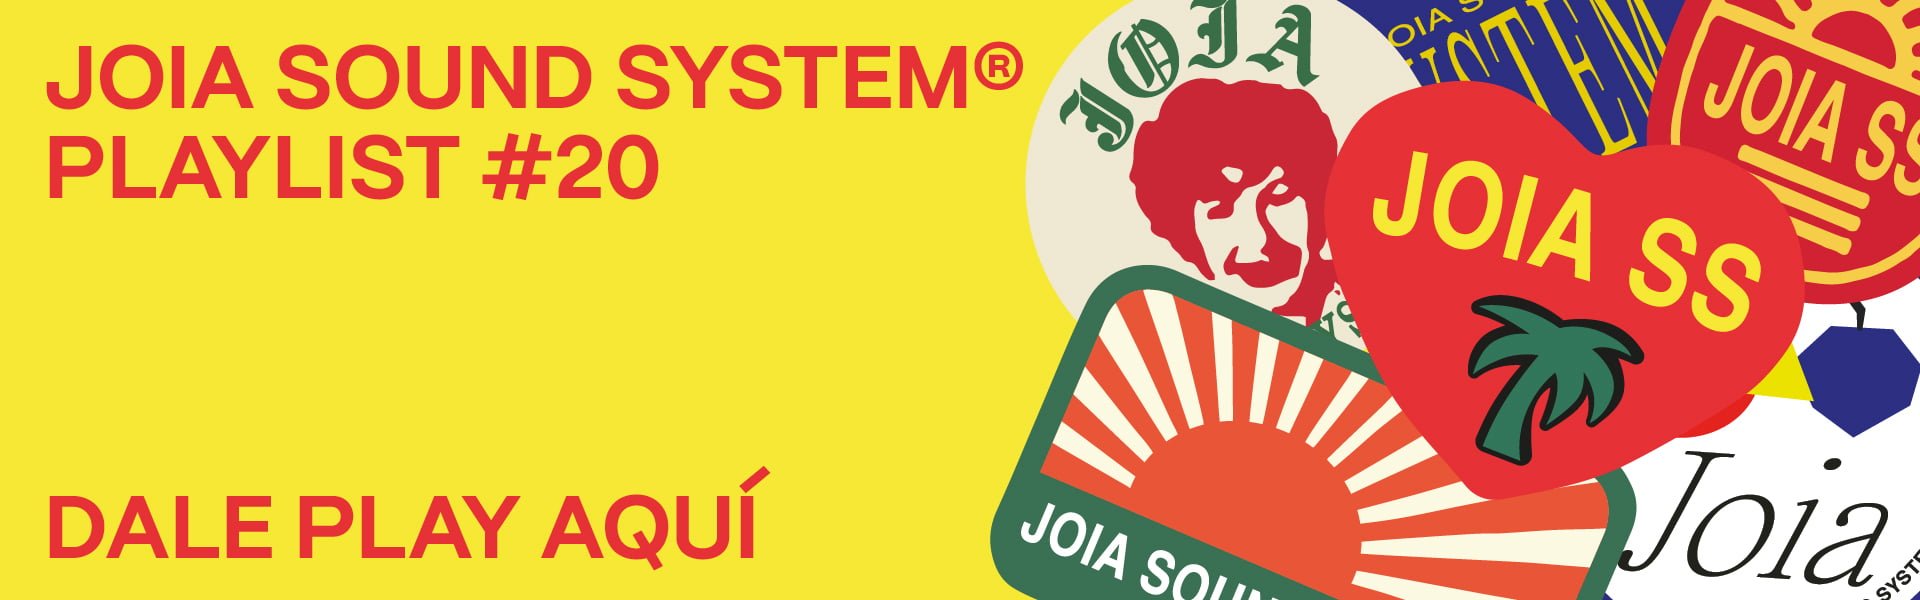 joia sound system banner